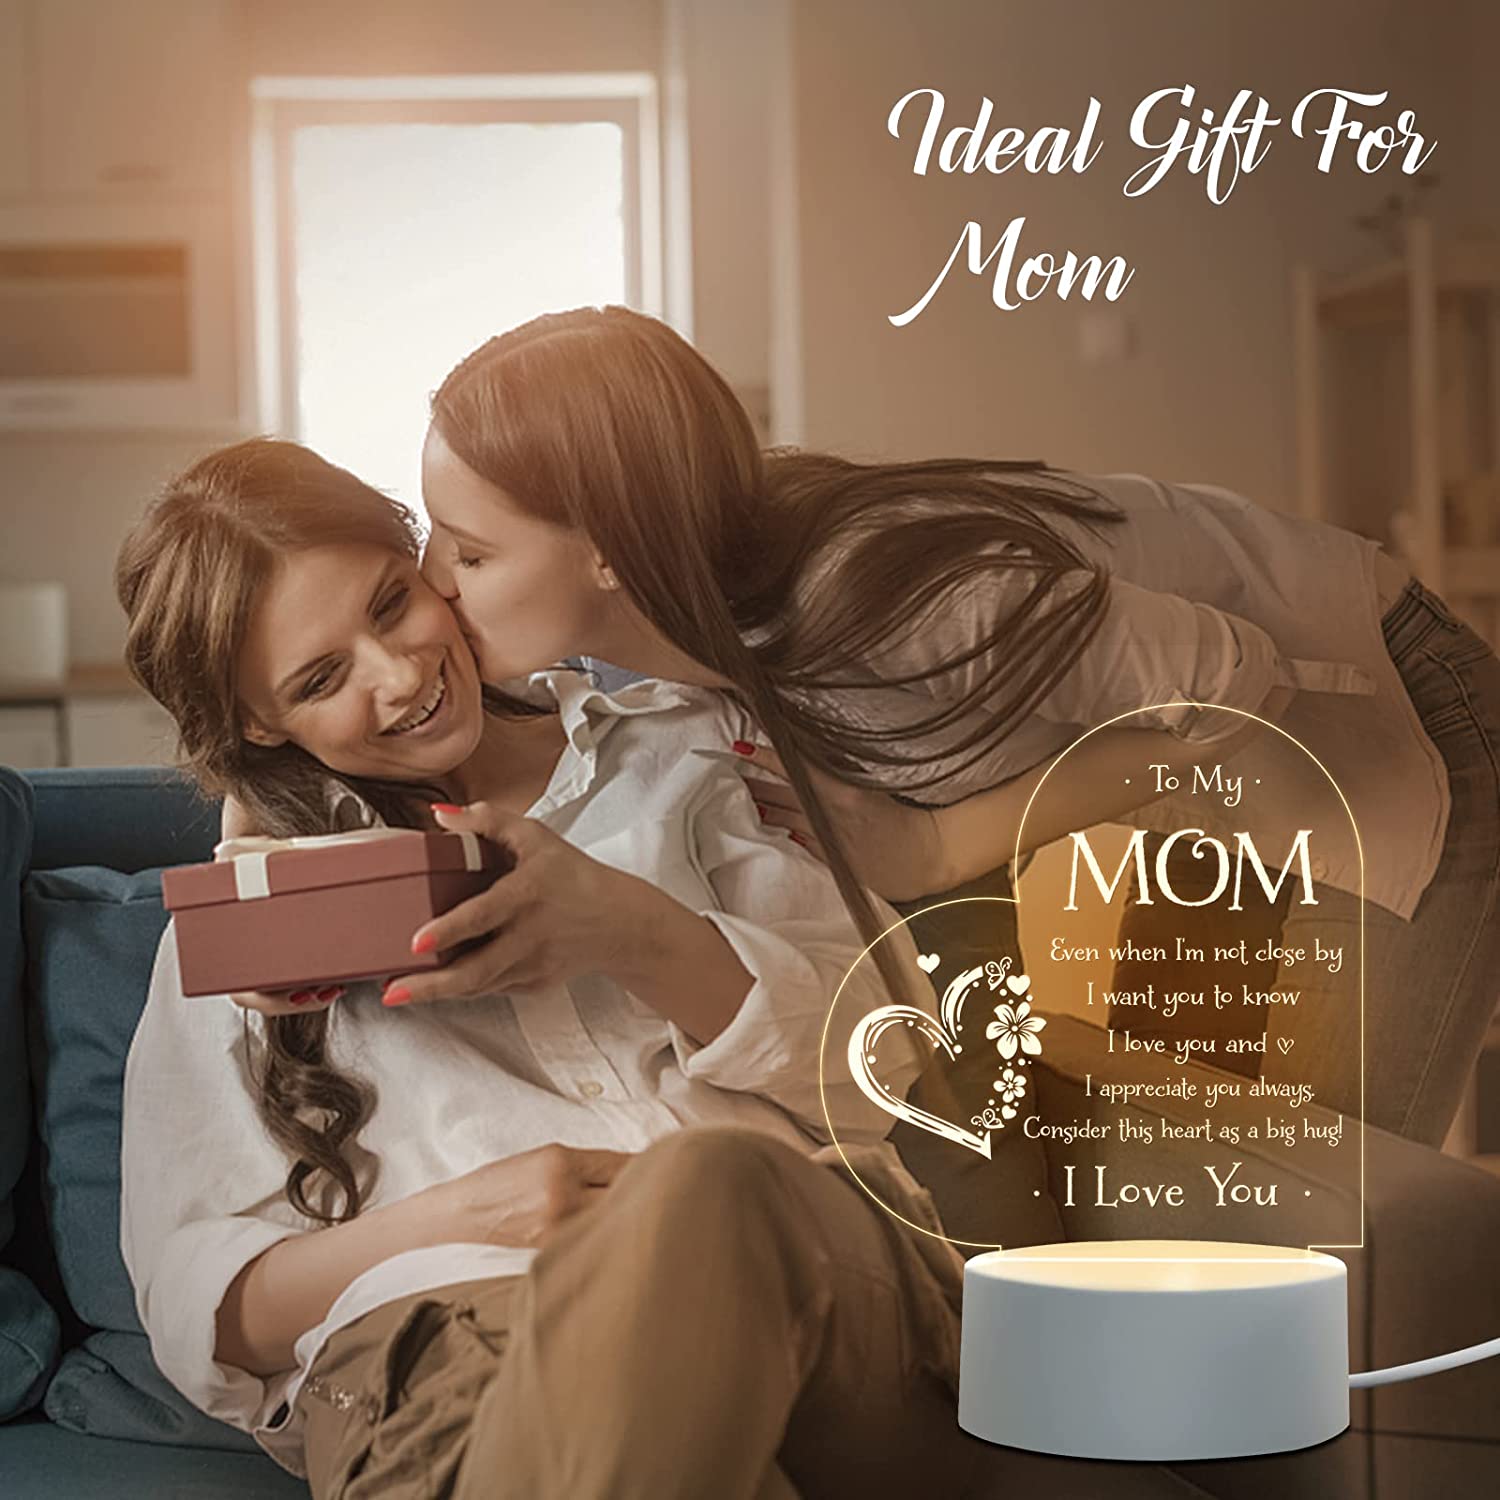 Gifts for Mom from Daughter, Mothers Day Gifts Ideas, Birthday